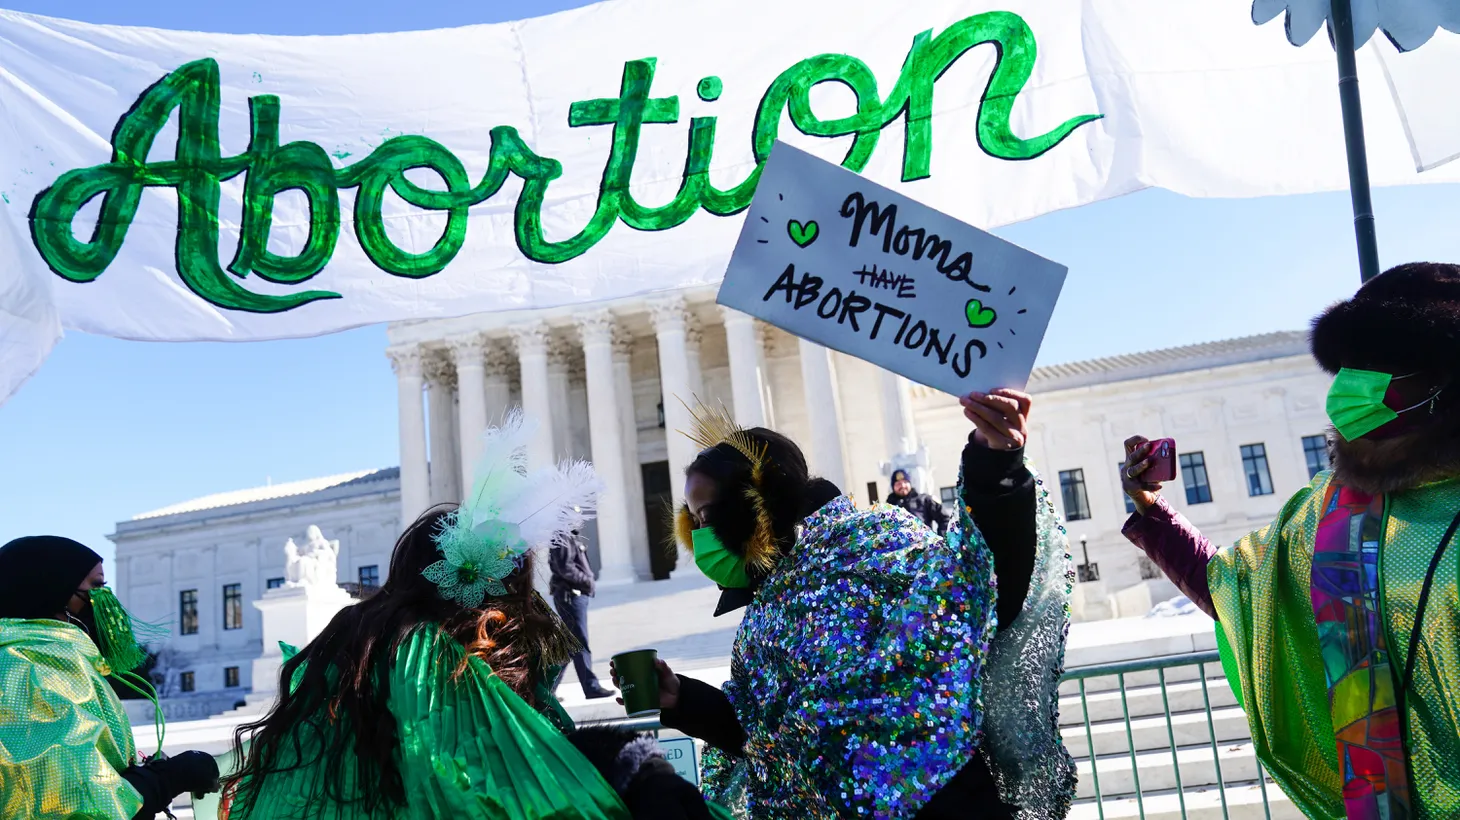 Activists participate in a rally to support abortion rights on the anniversary of the Roe v. Wade decision at the U.S. Supreme Court in Washington, U.S., January 22, 2022.